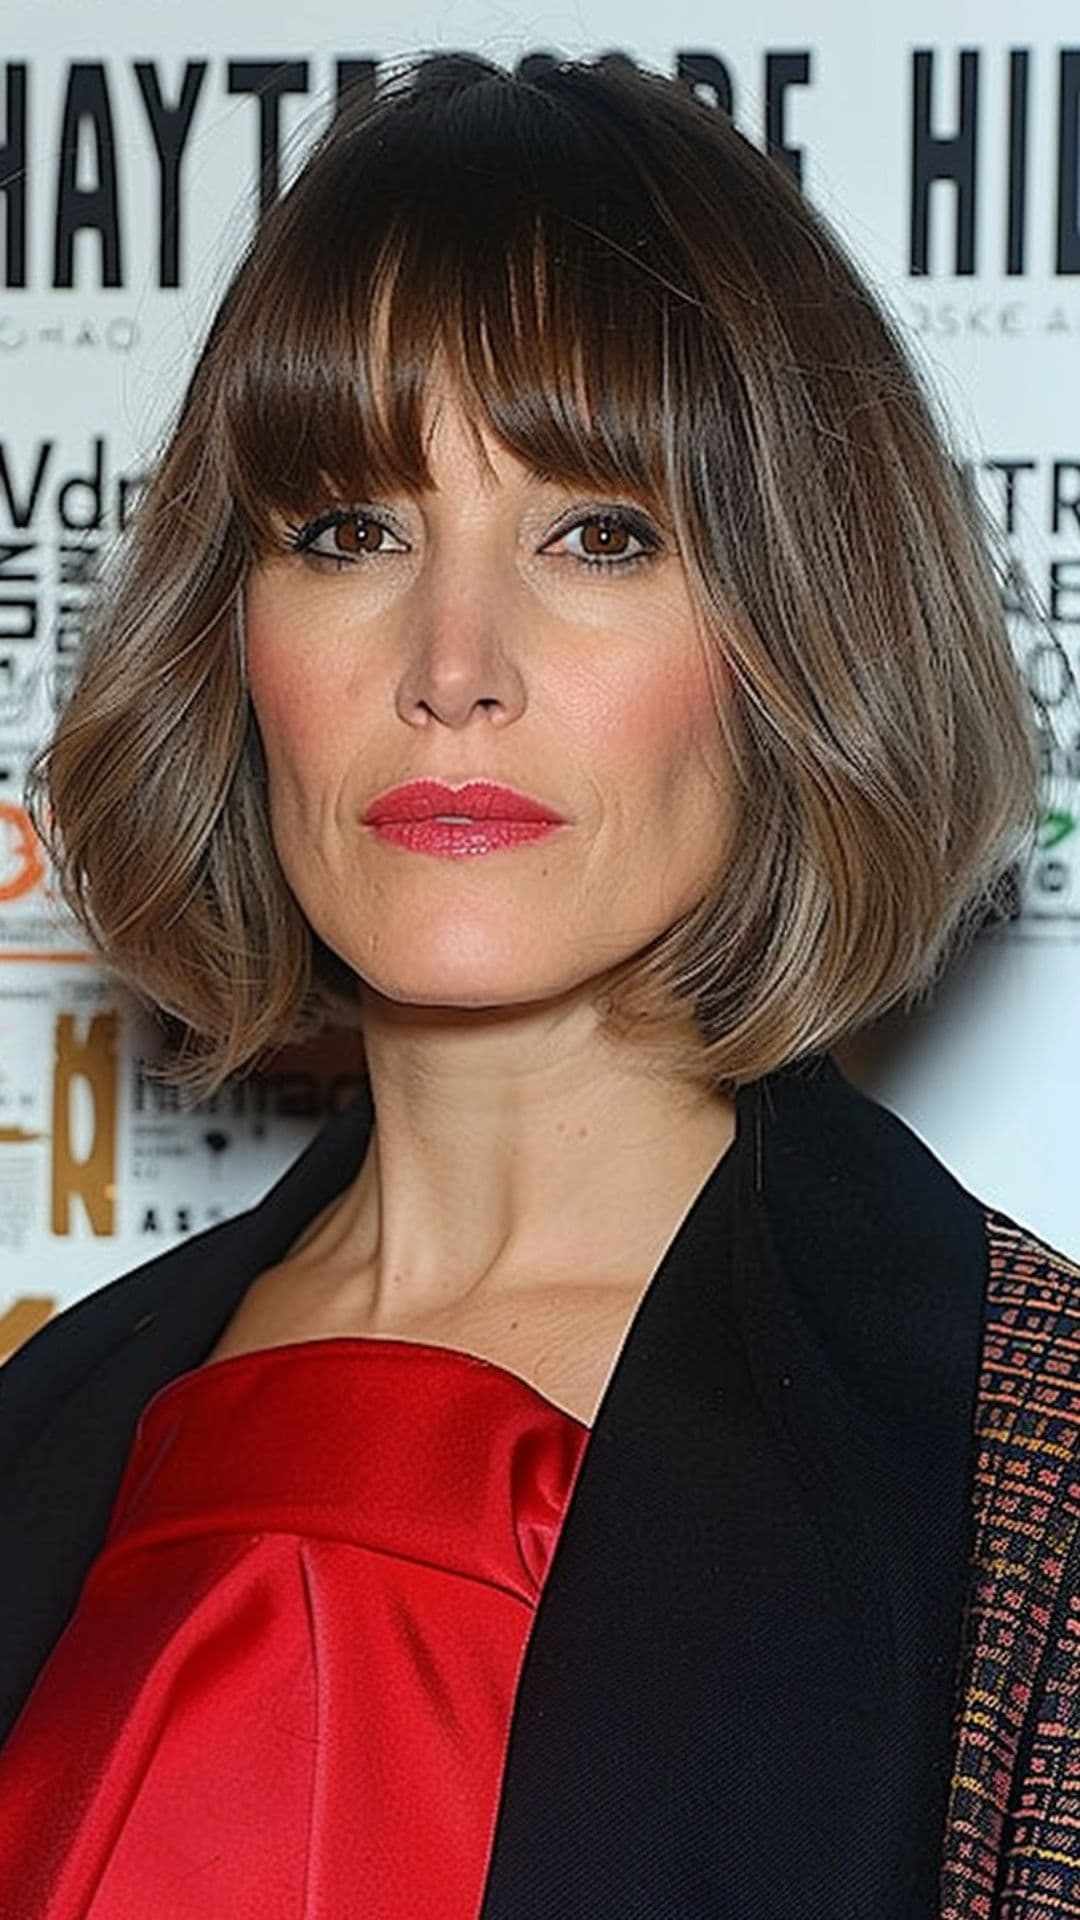 An older woman modelling an arched bangs with bob hairstyle.